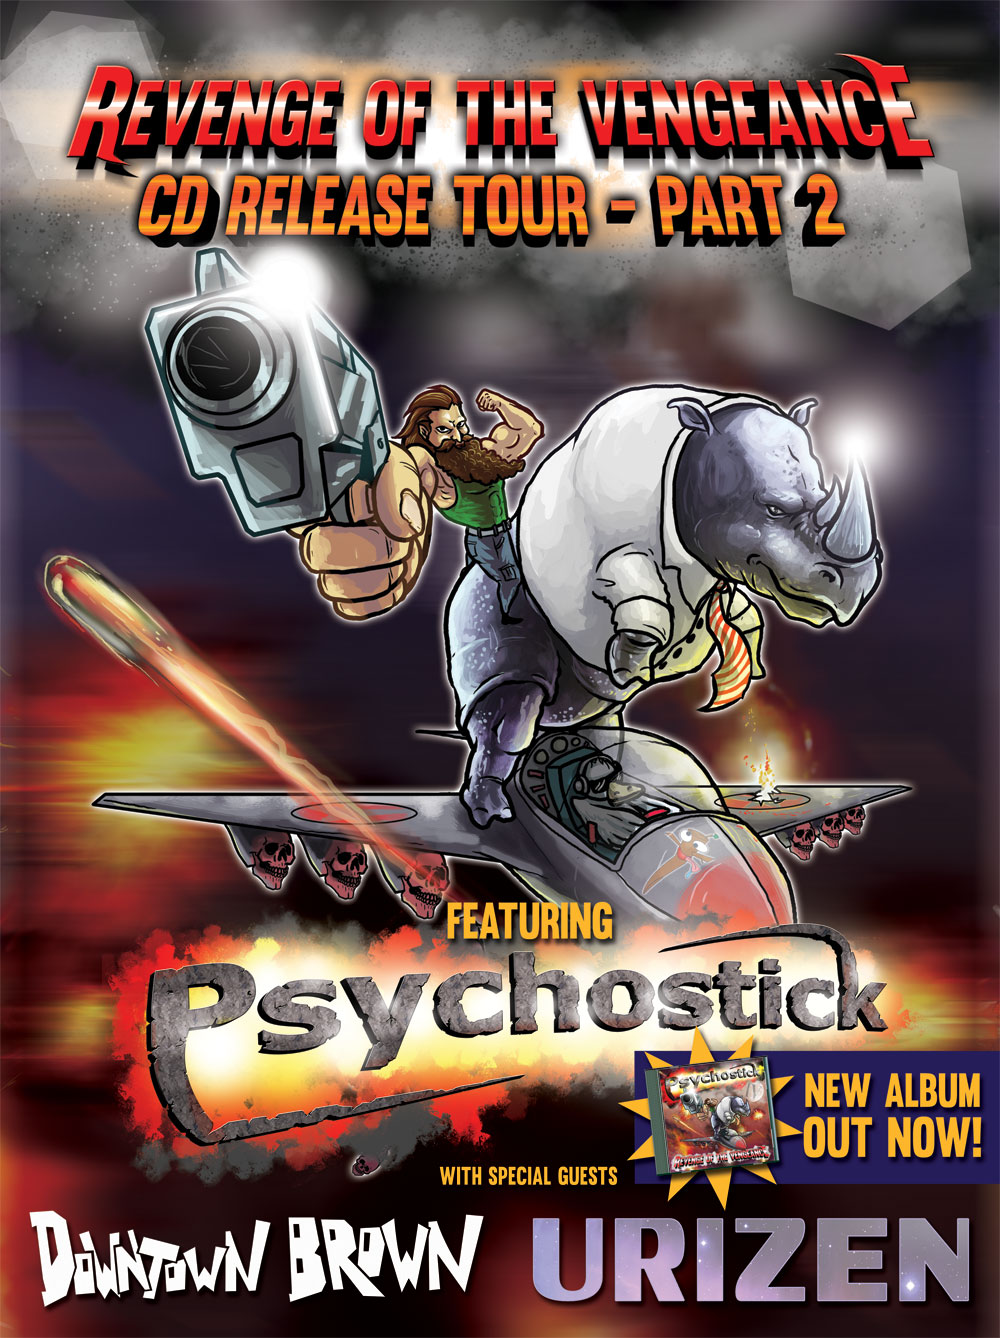 PSYCHOSTICK Confirmed For Dirt Fest 2015 and Tour Dates